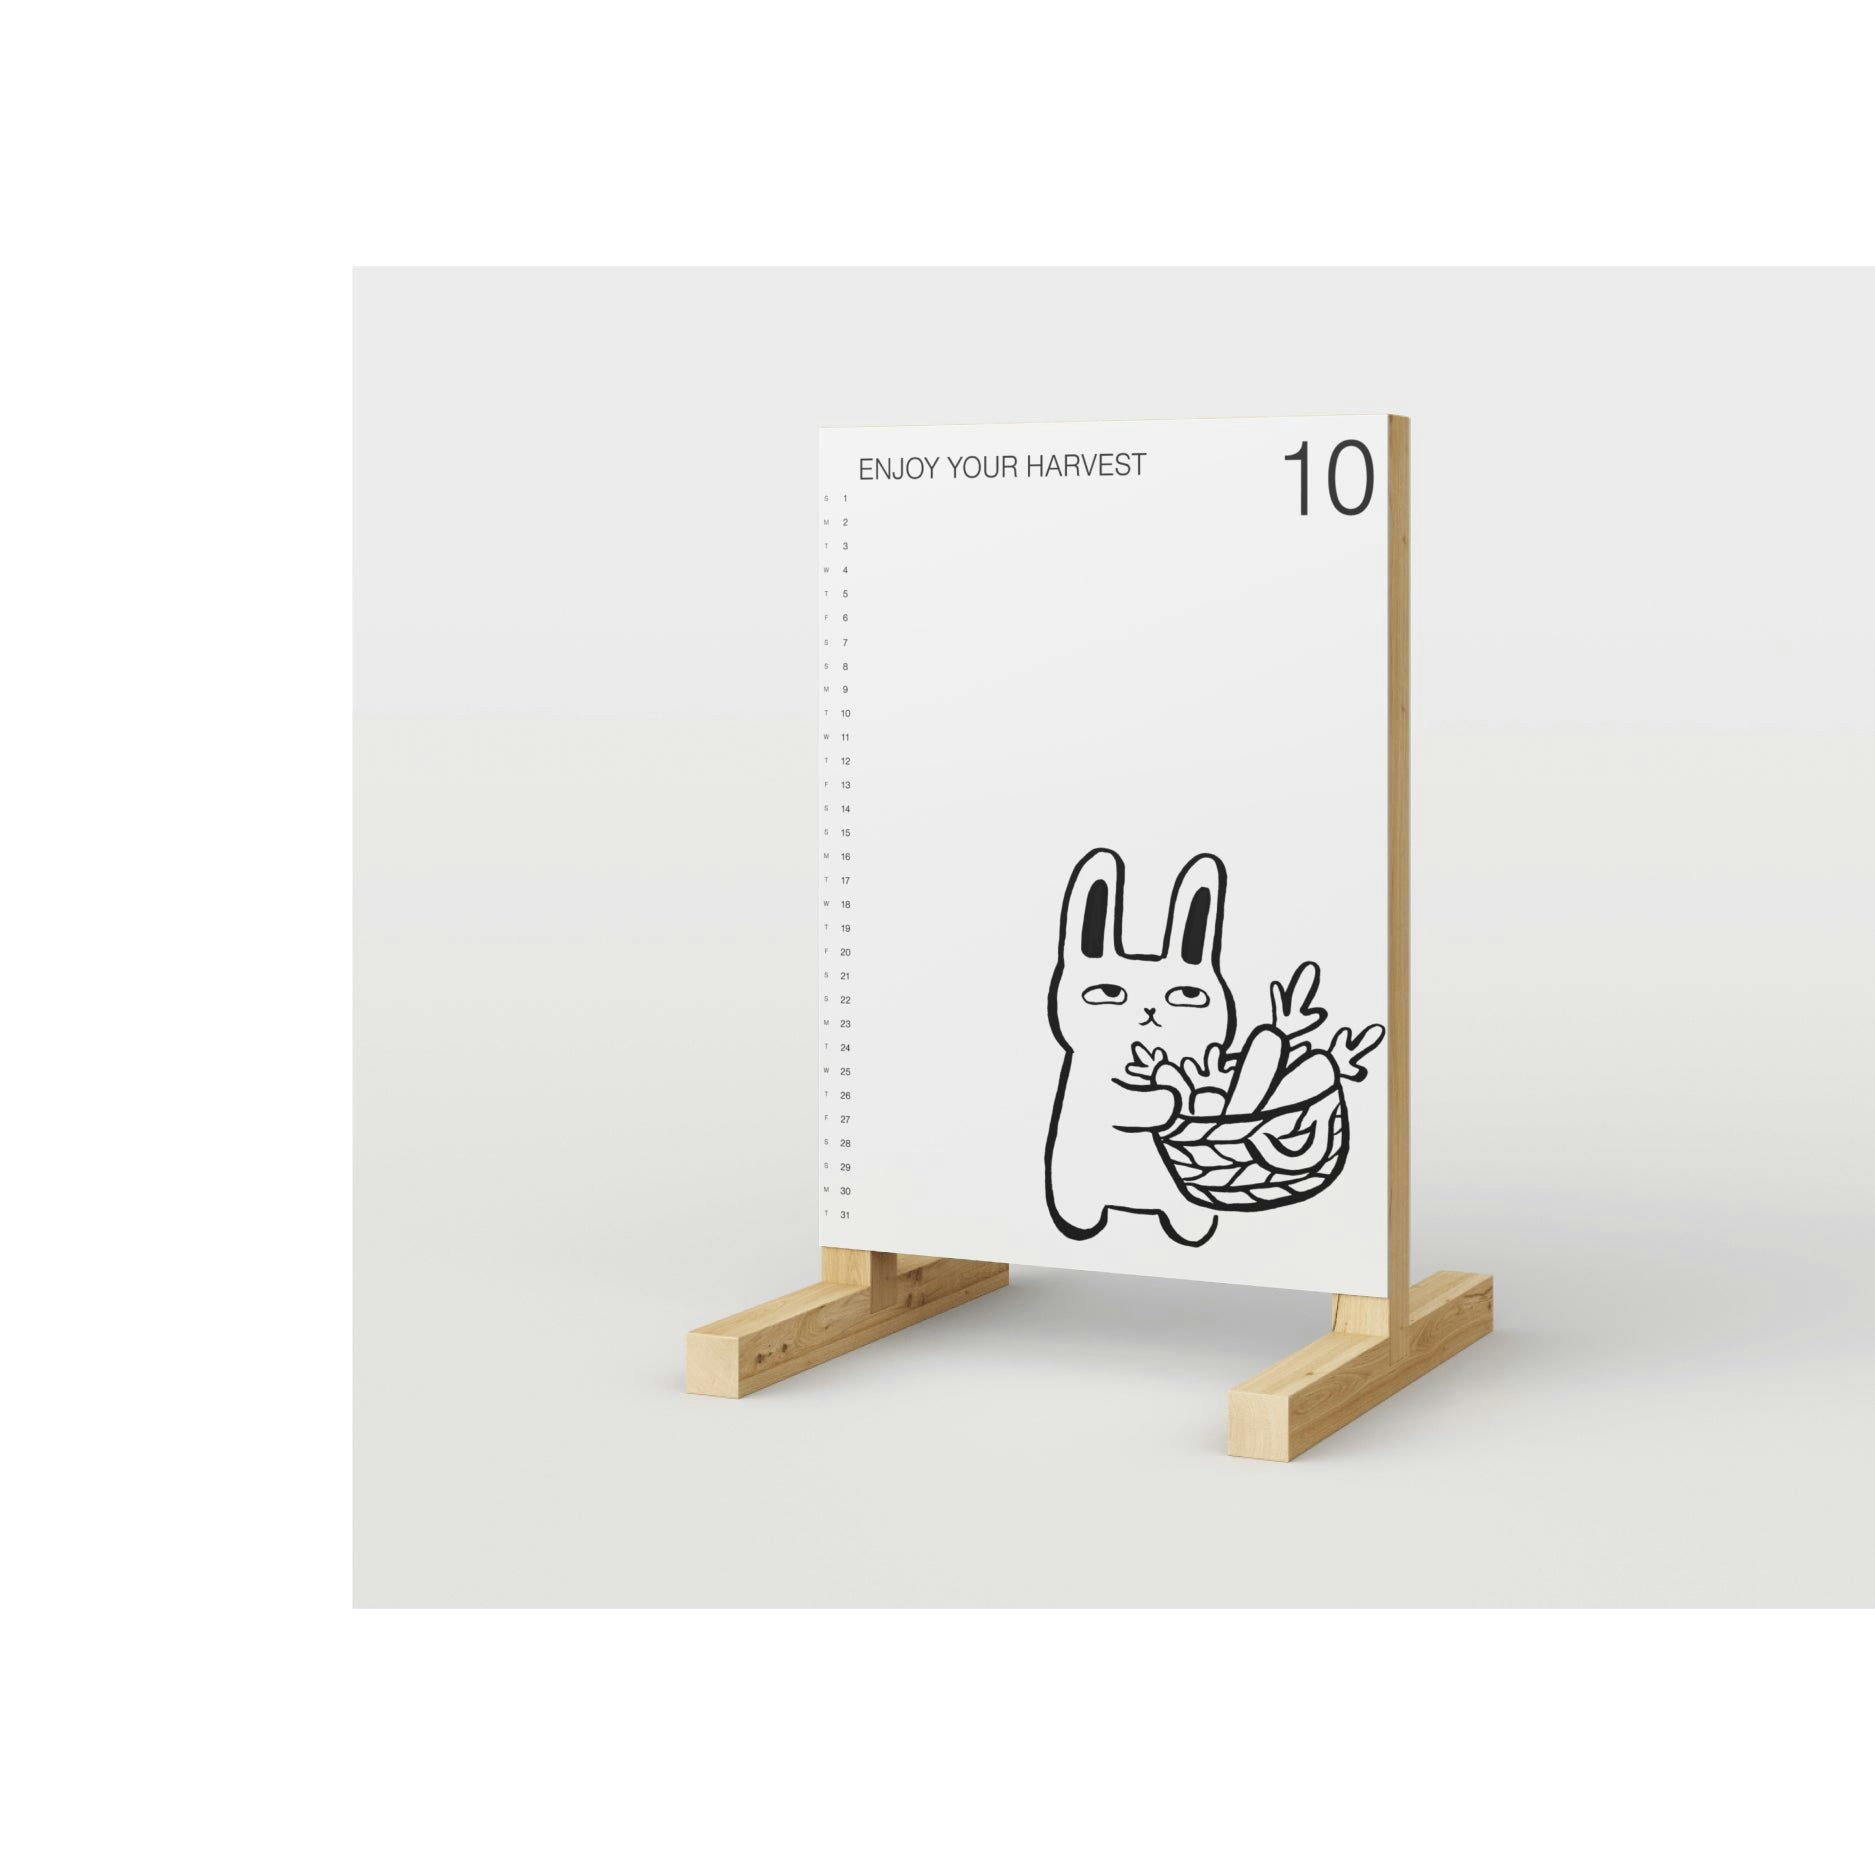 04.  Ink Rabbit Affirmations (Printable Posters)